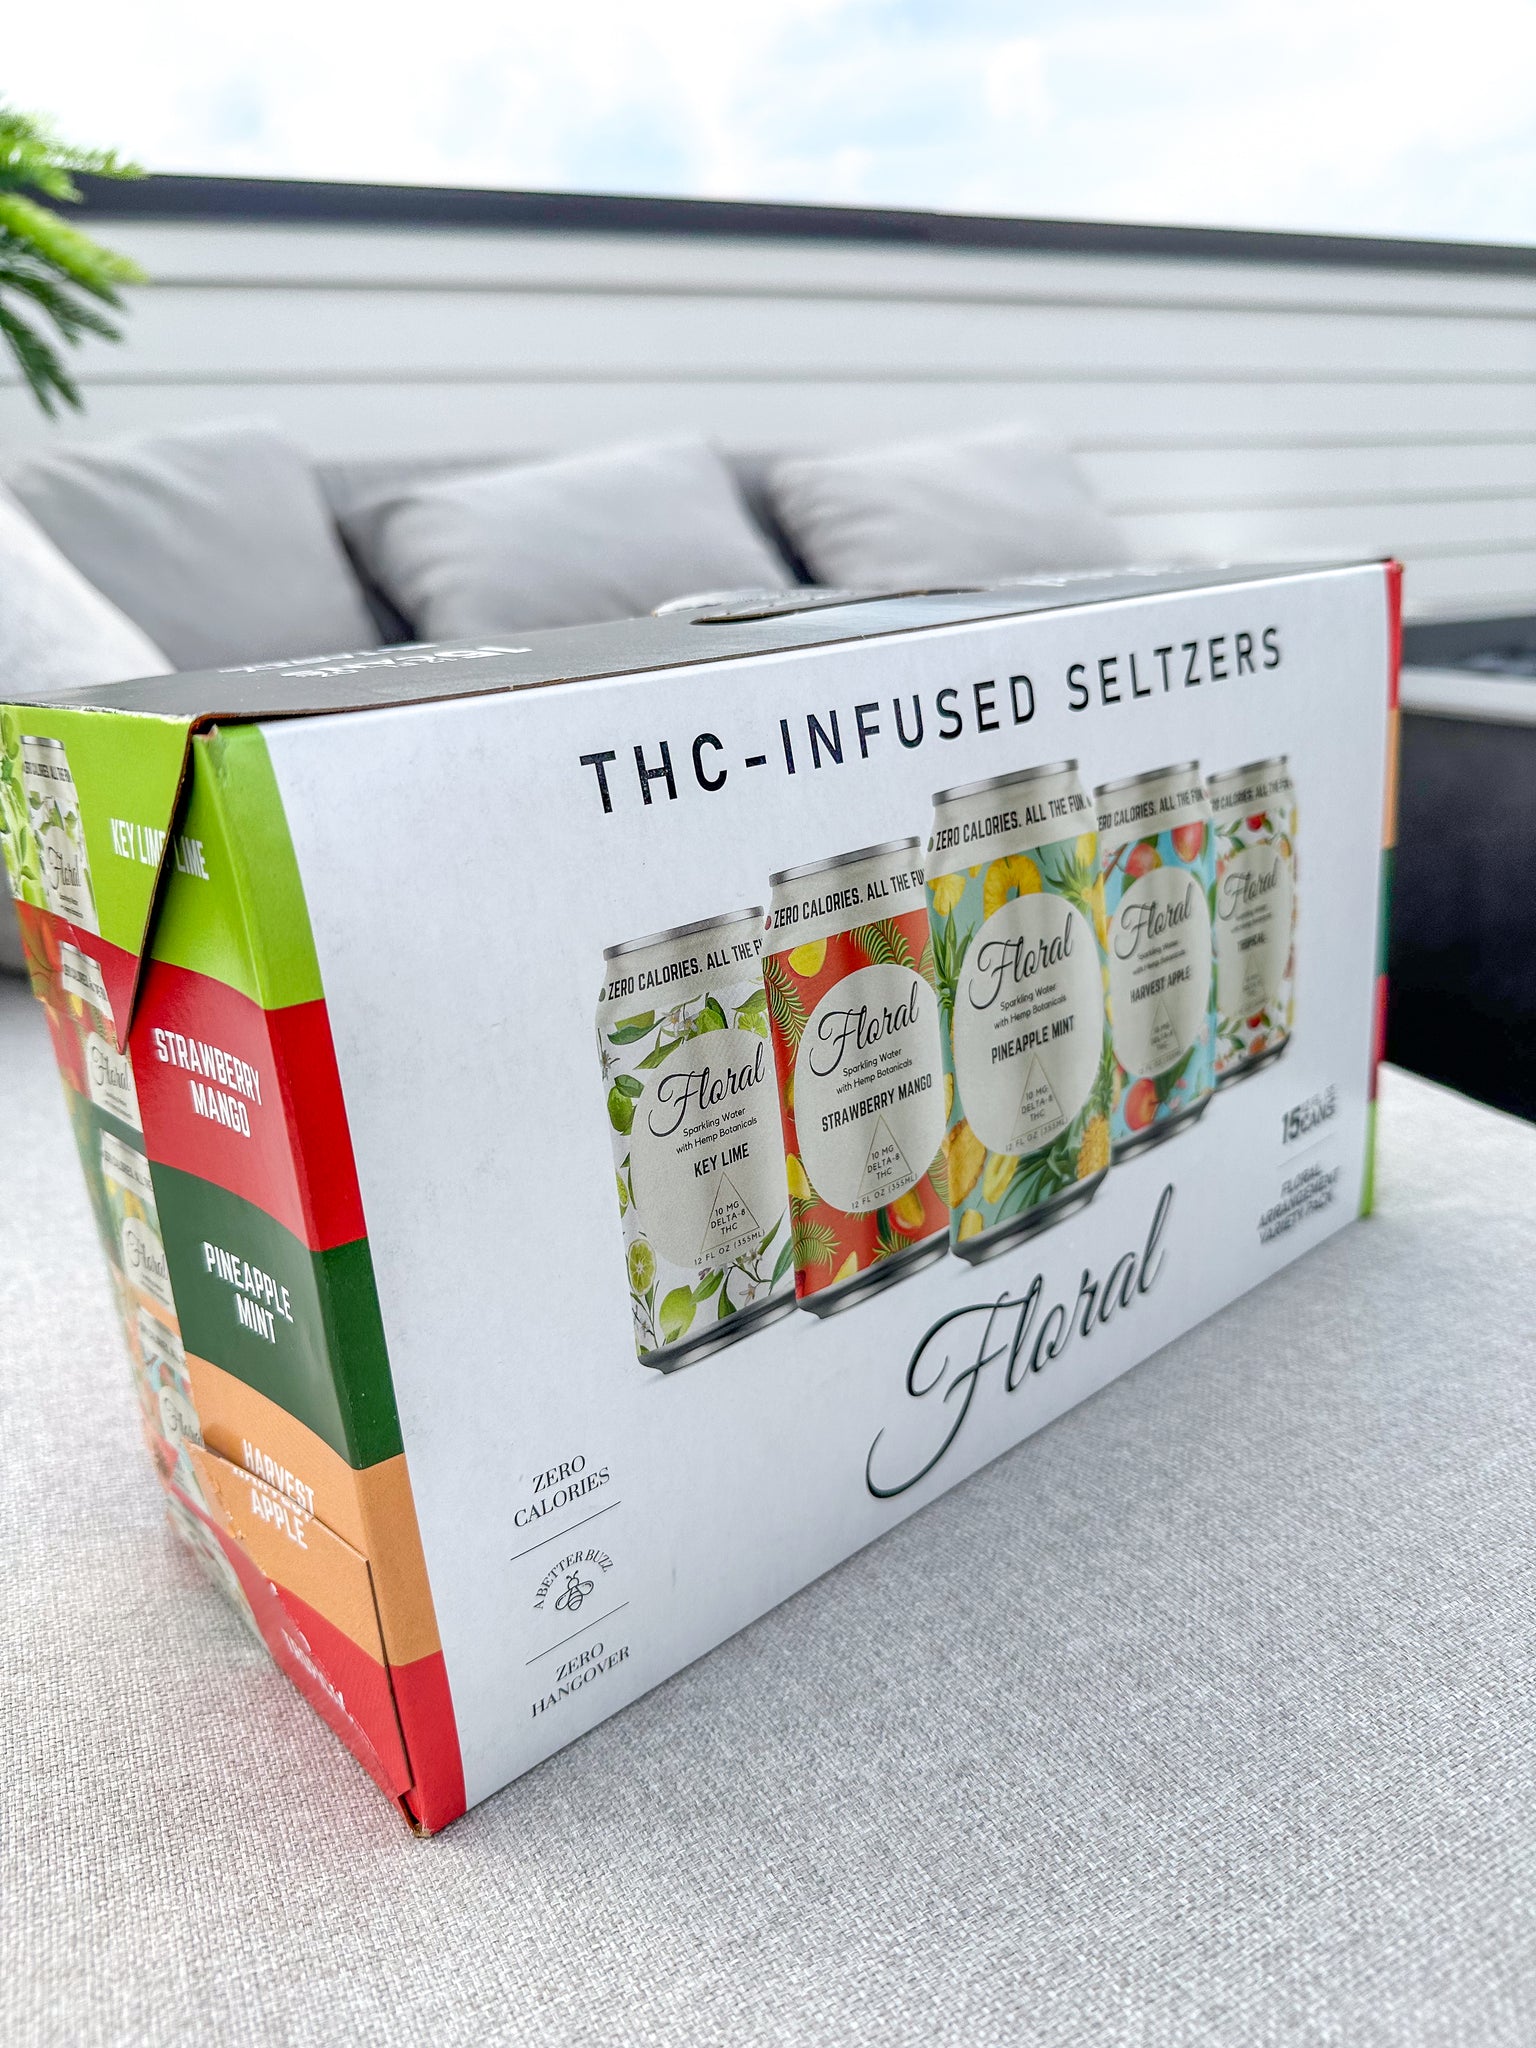 The cardboard box of Floral Beverages Floral Arrangement, an assortment of THC-infused seltzer flavors